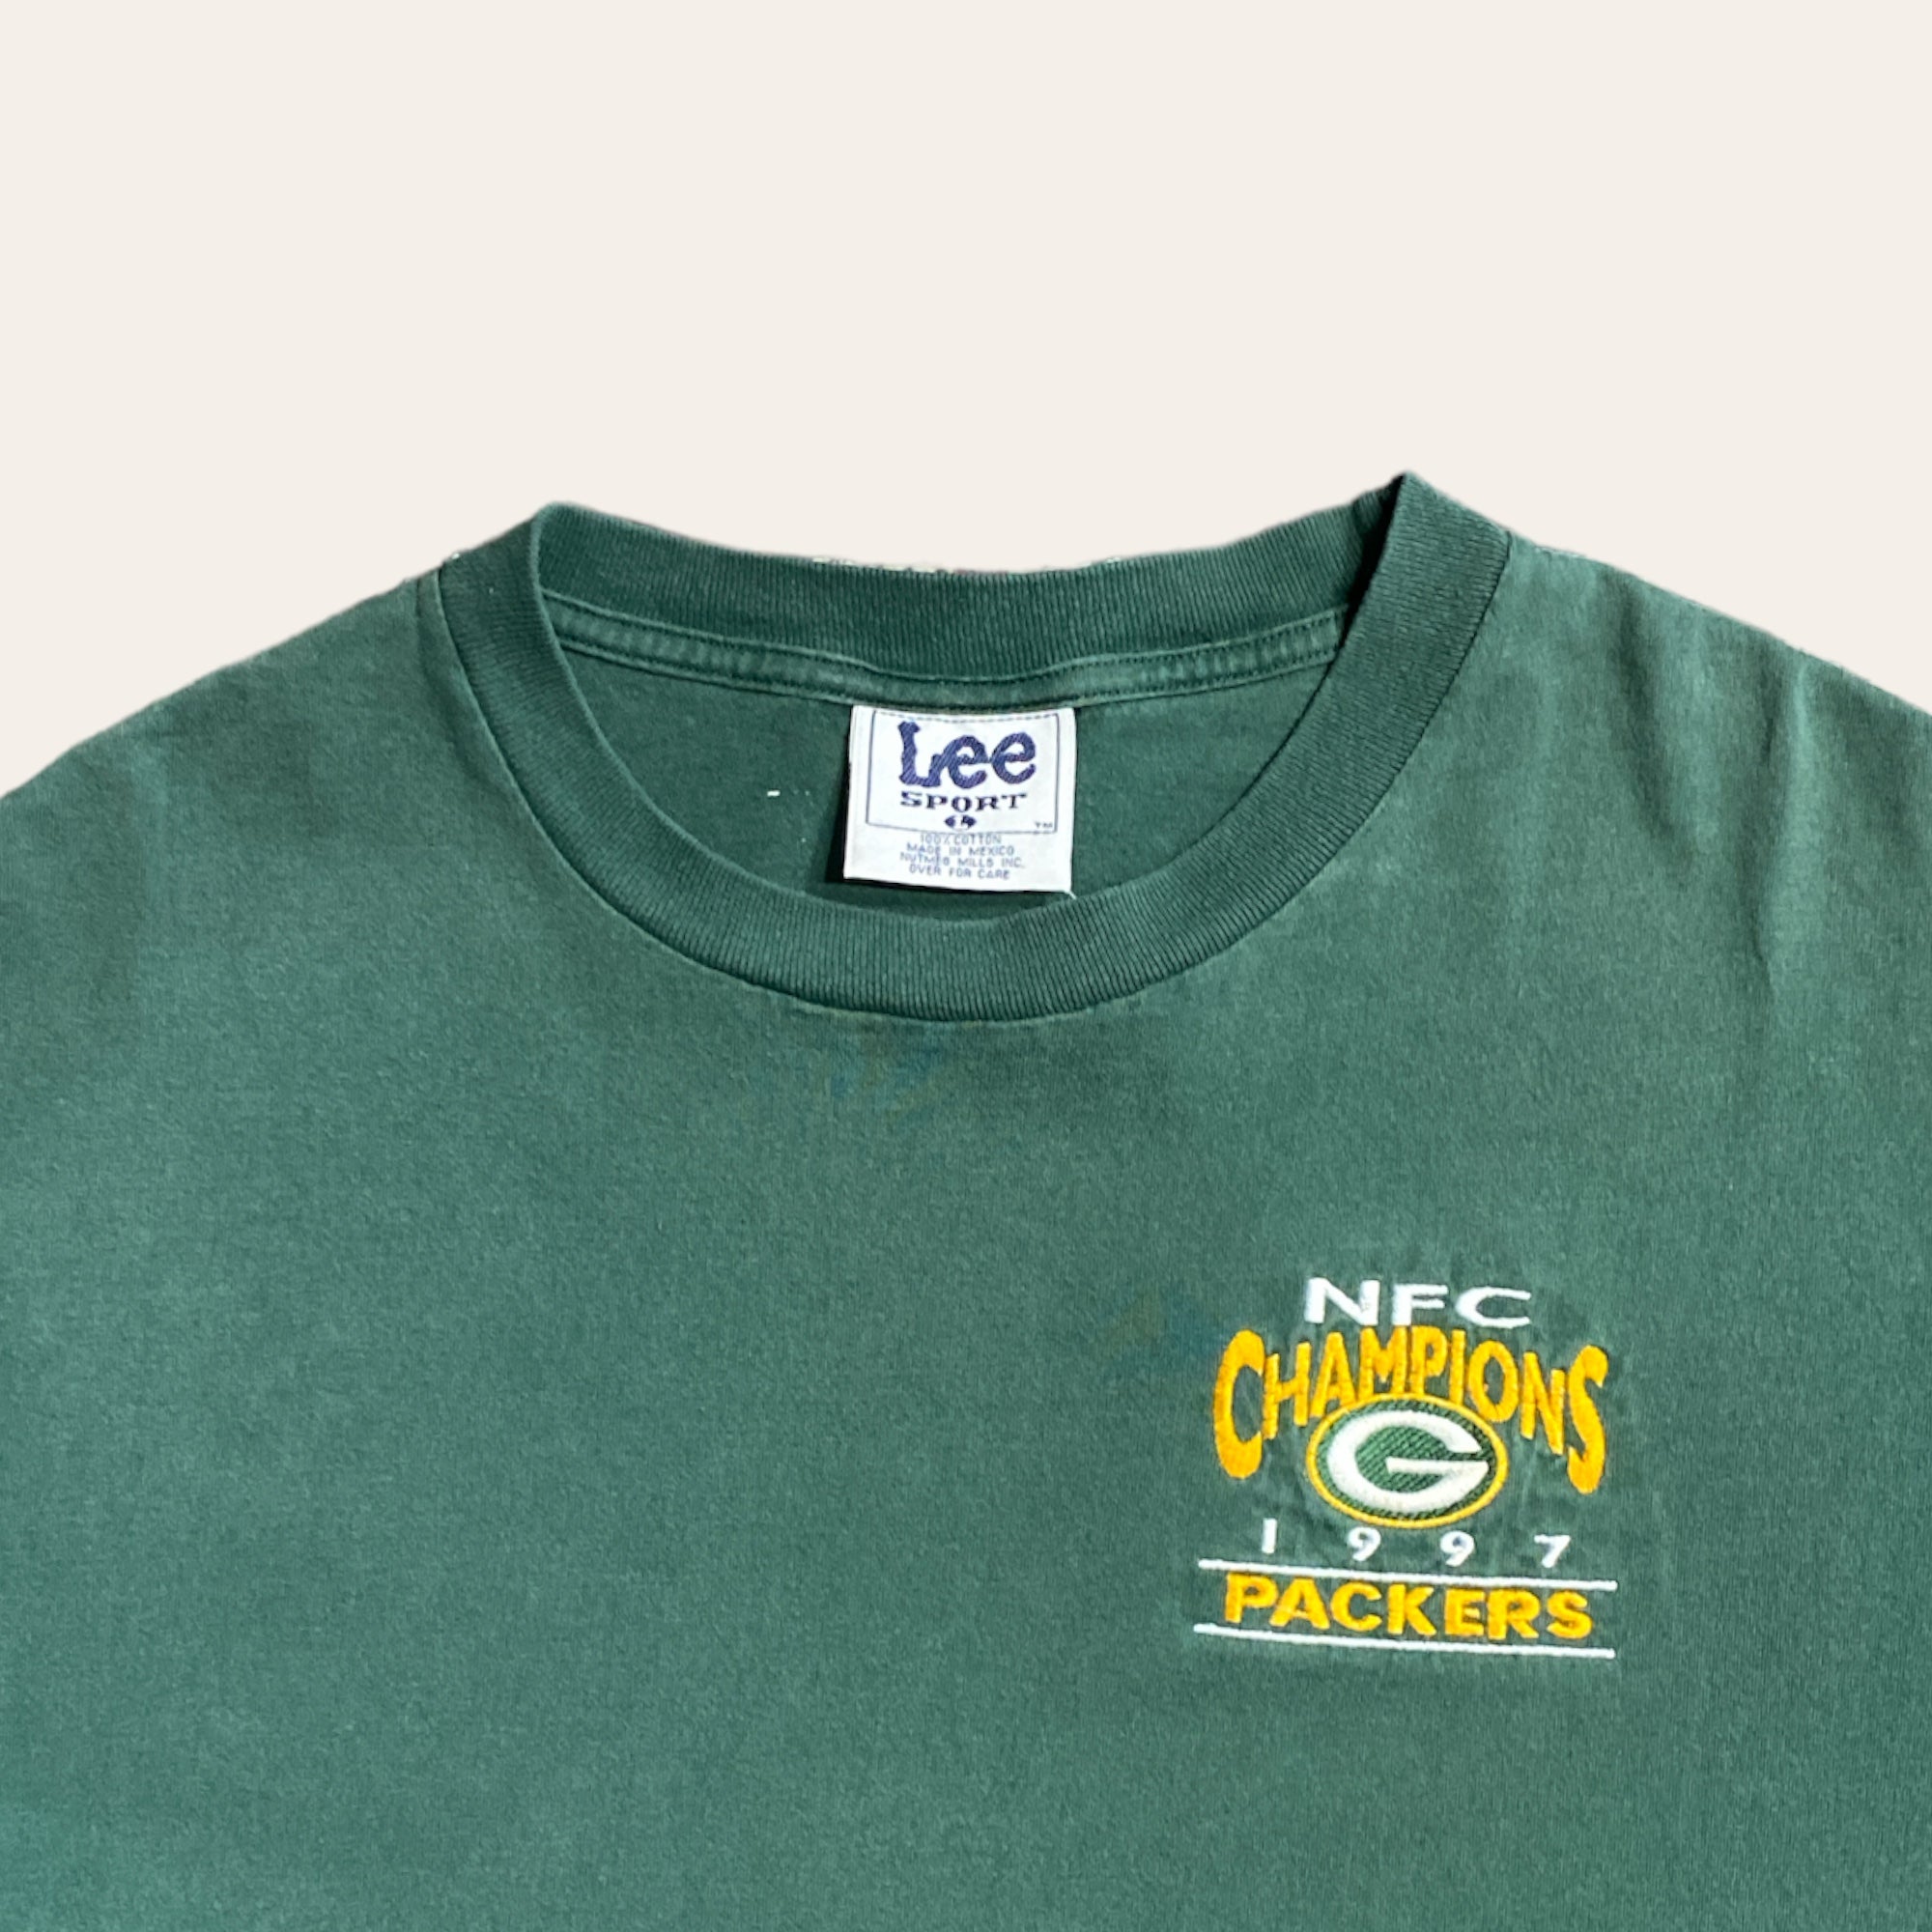 1997 Green Bay Packers Tee Size L